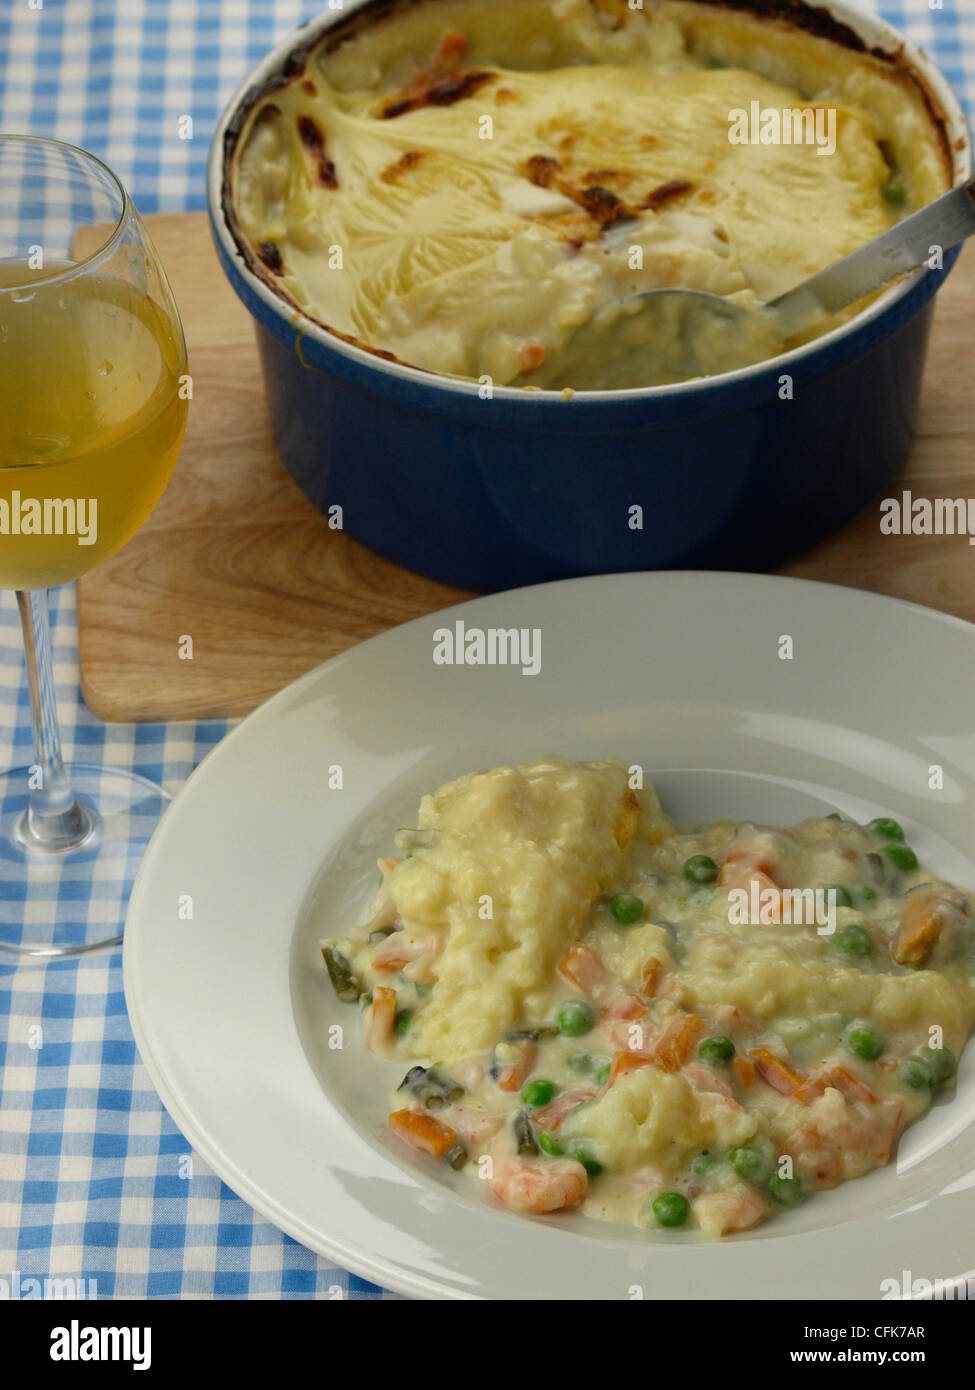 Fish pie with extra vegetables Stock Photo